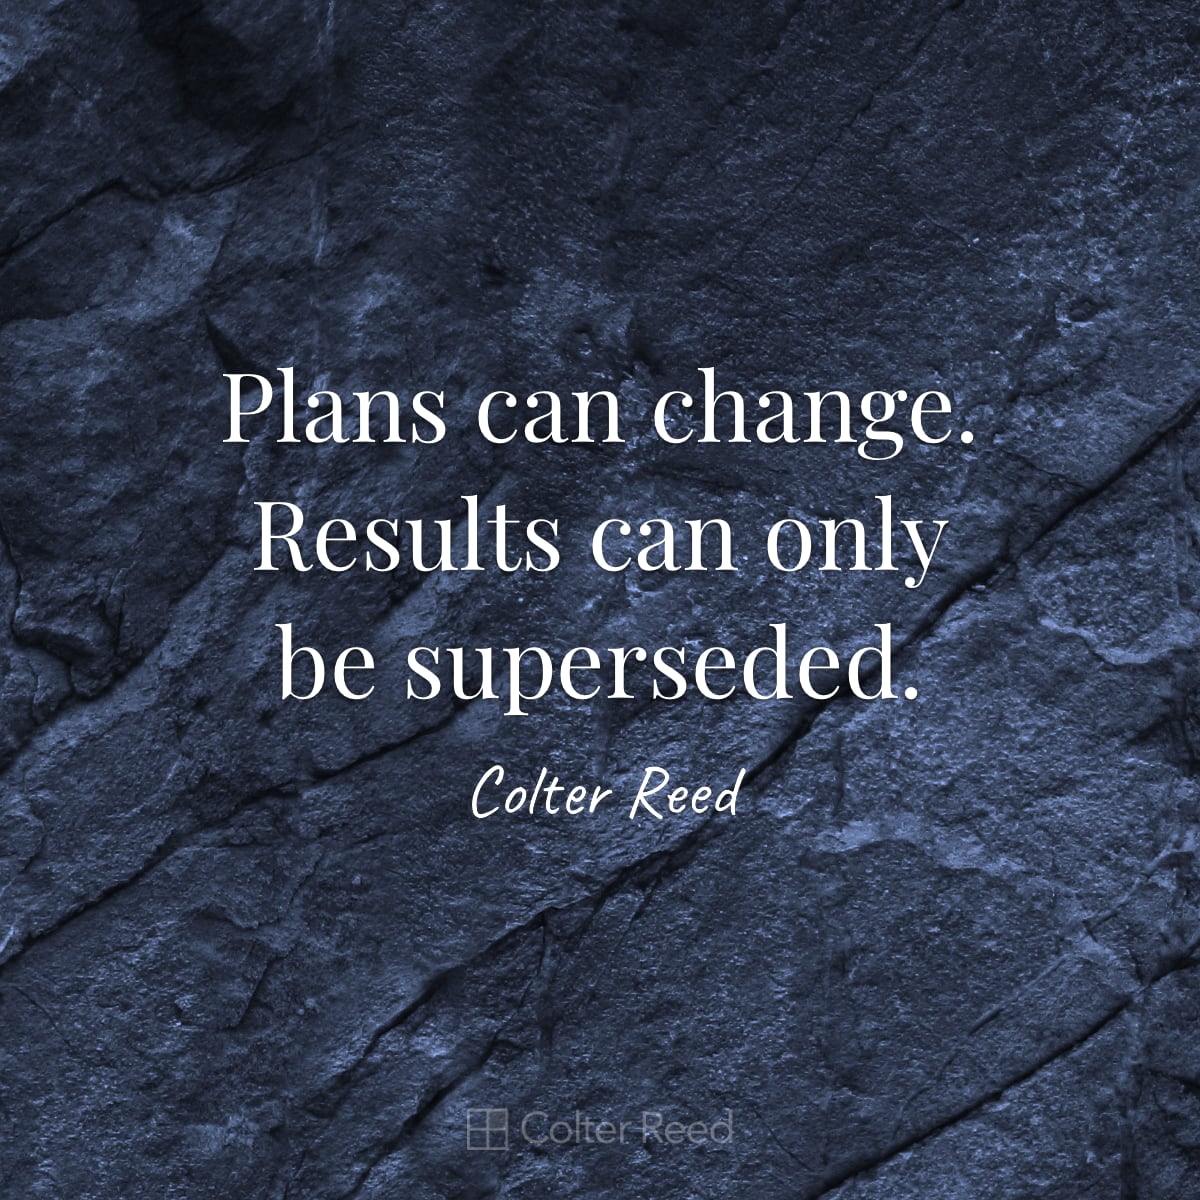 Plans can change. Results can only be superseded. —Colter Reed